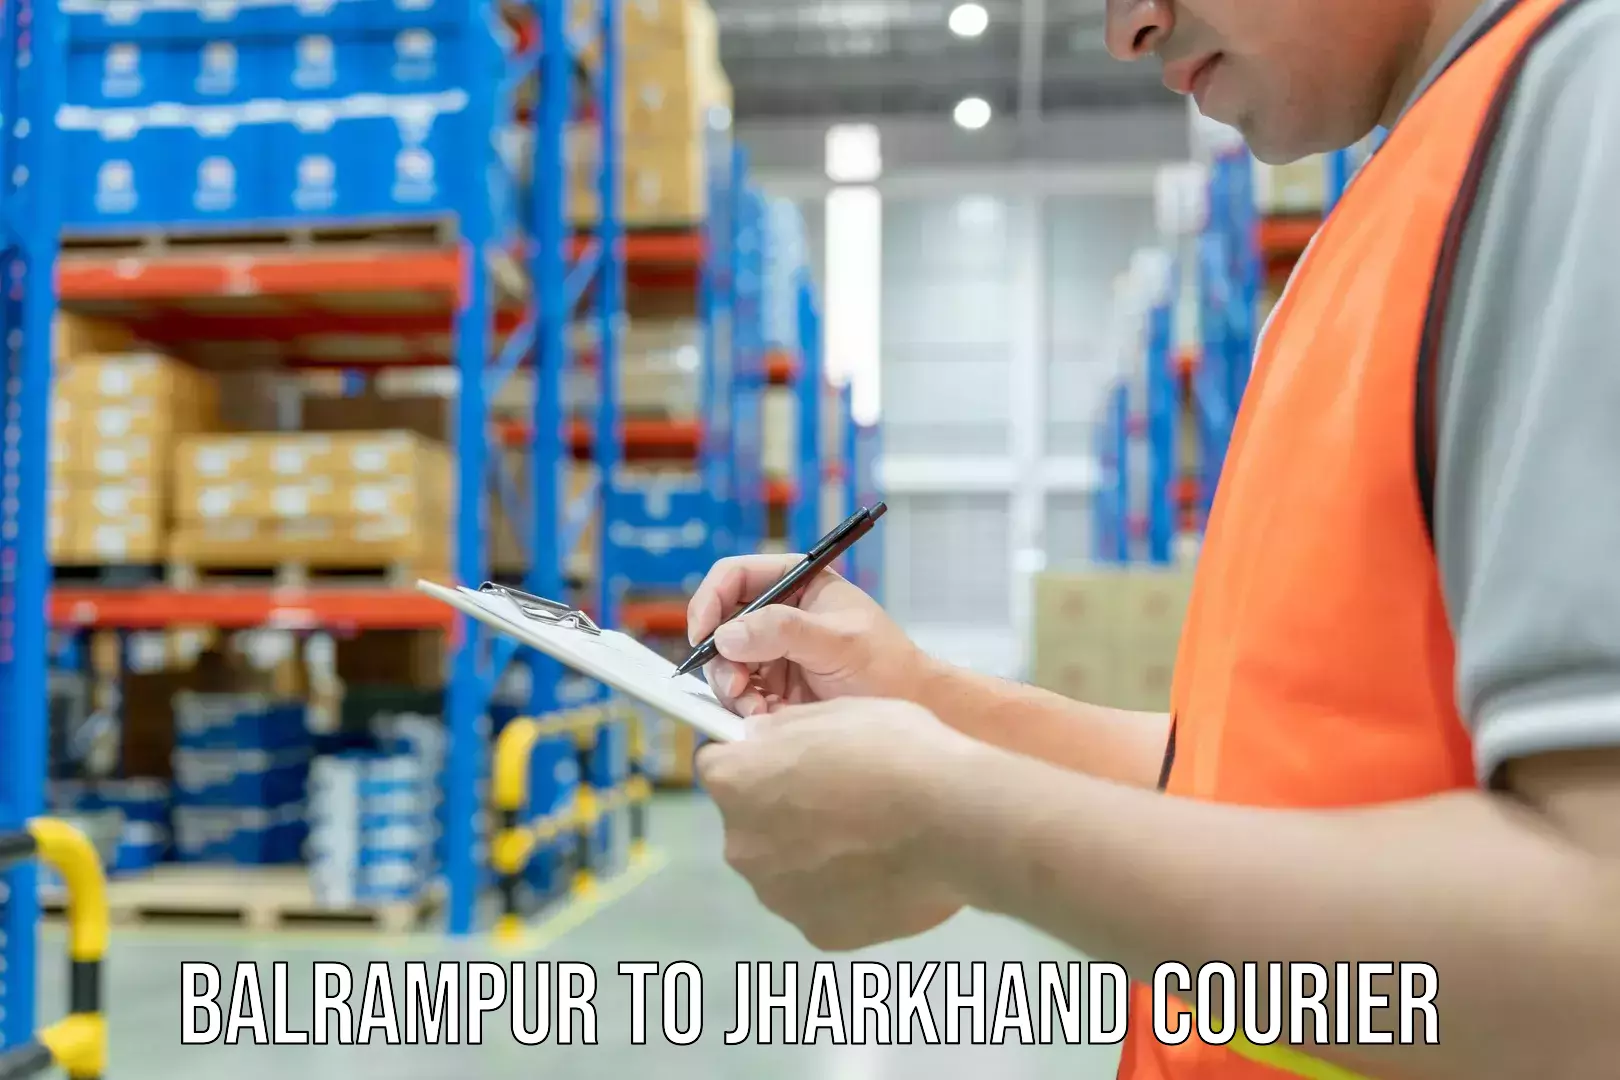 State-of-the-art courier technology Balrampur to Jharkhand